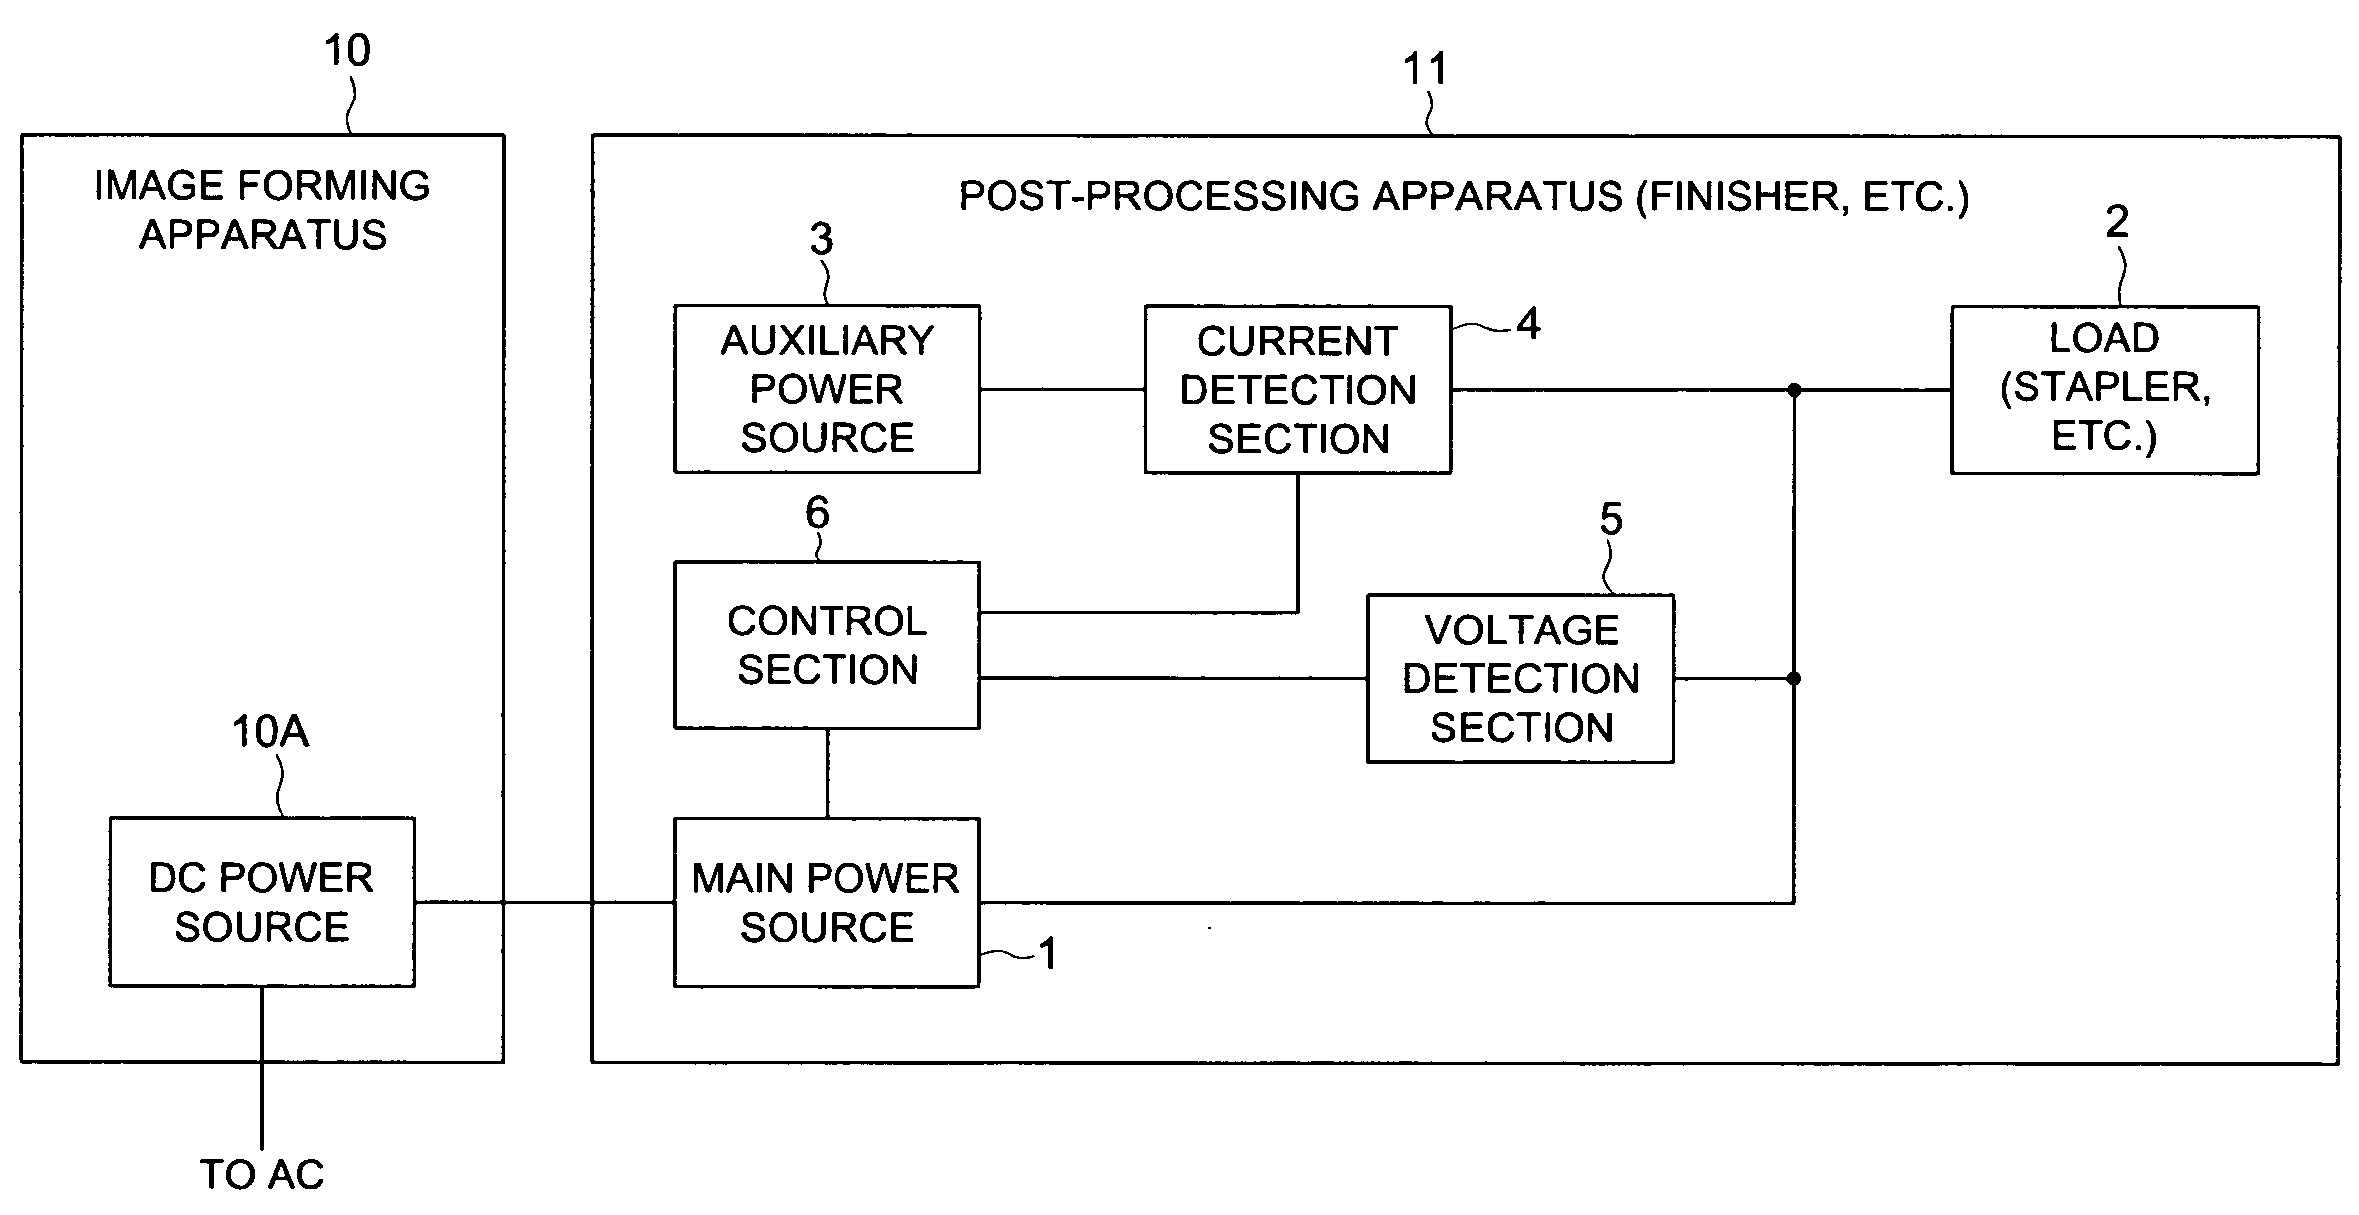 Power unit and image forming system